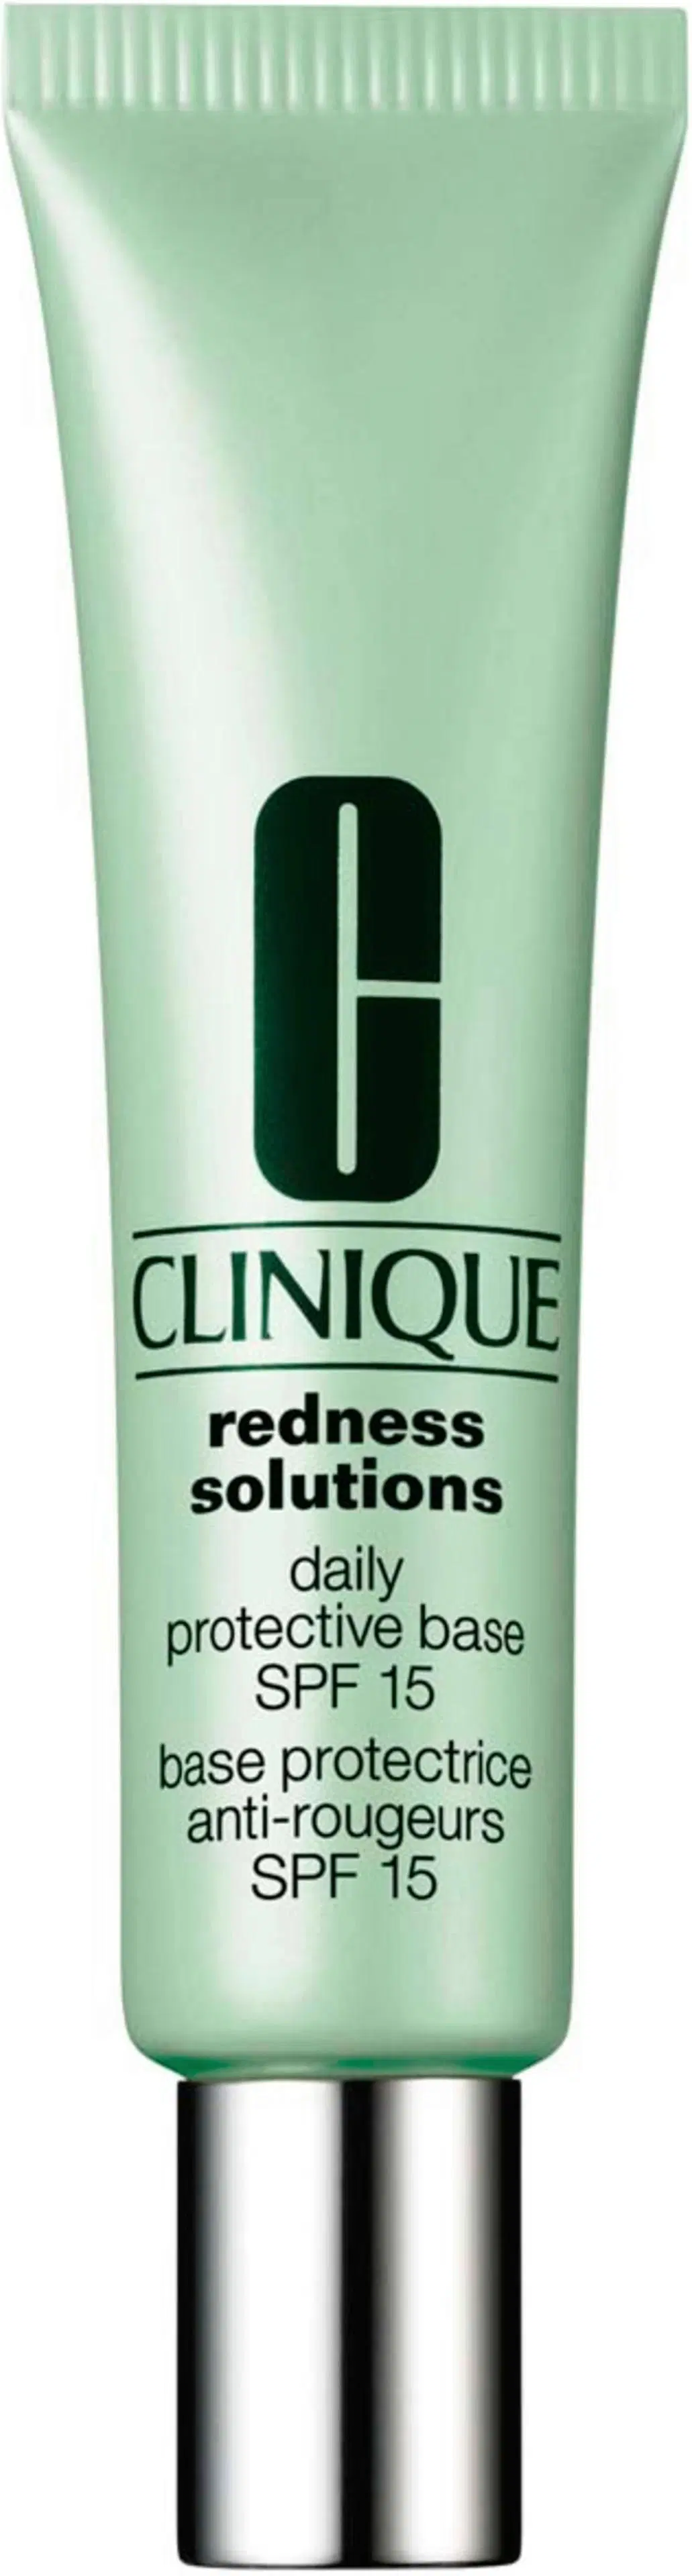 Clinique Redness Solutions Daily Protective Base SPF 15 pohjustusvoide 40 ml